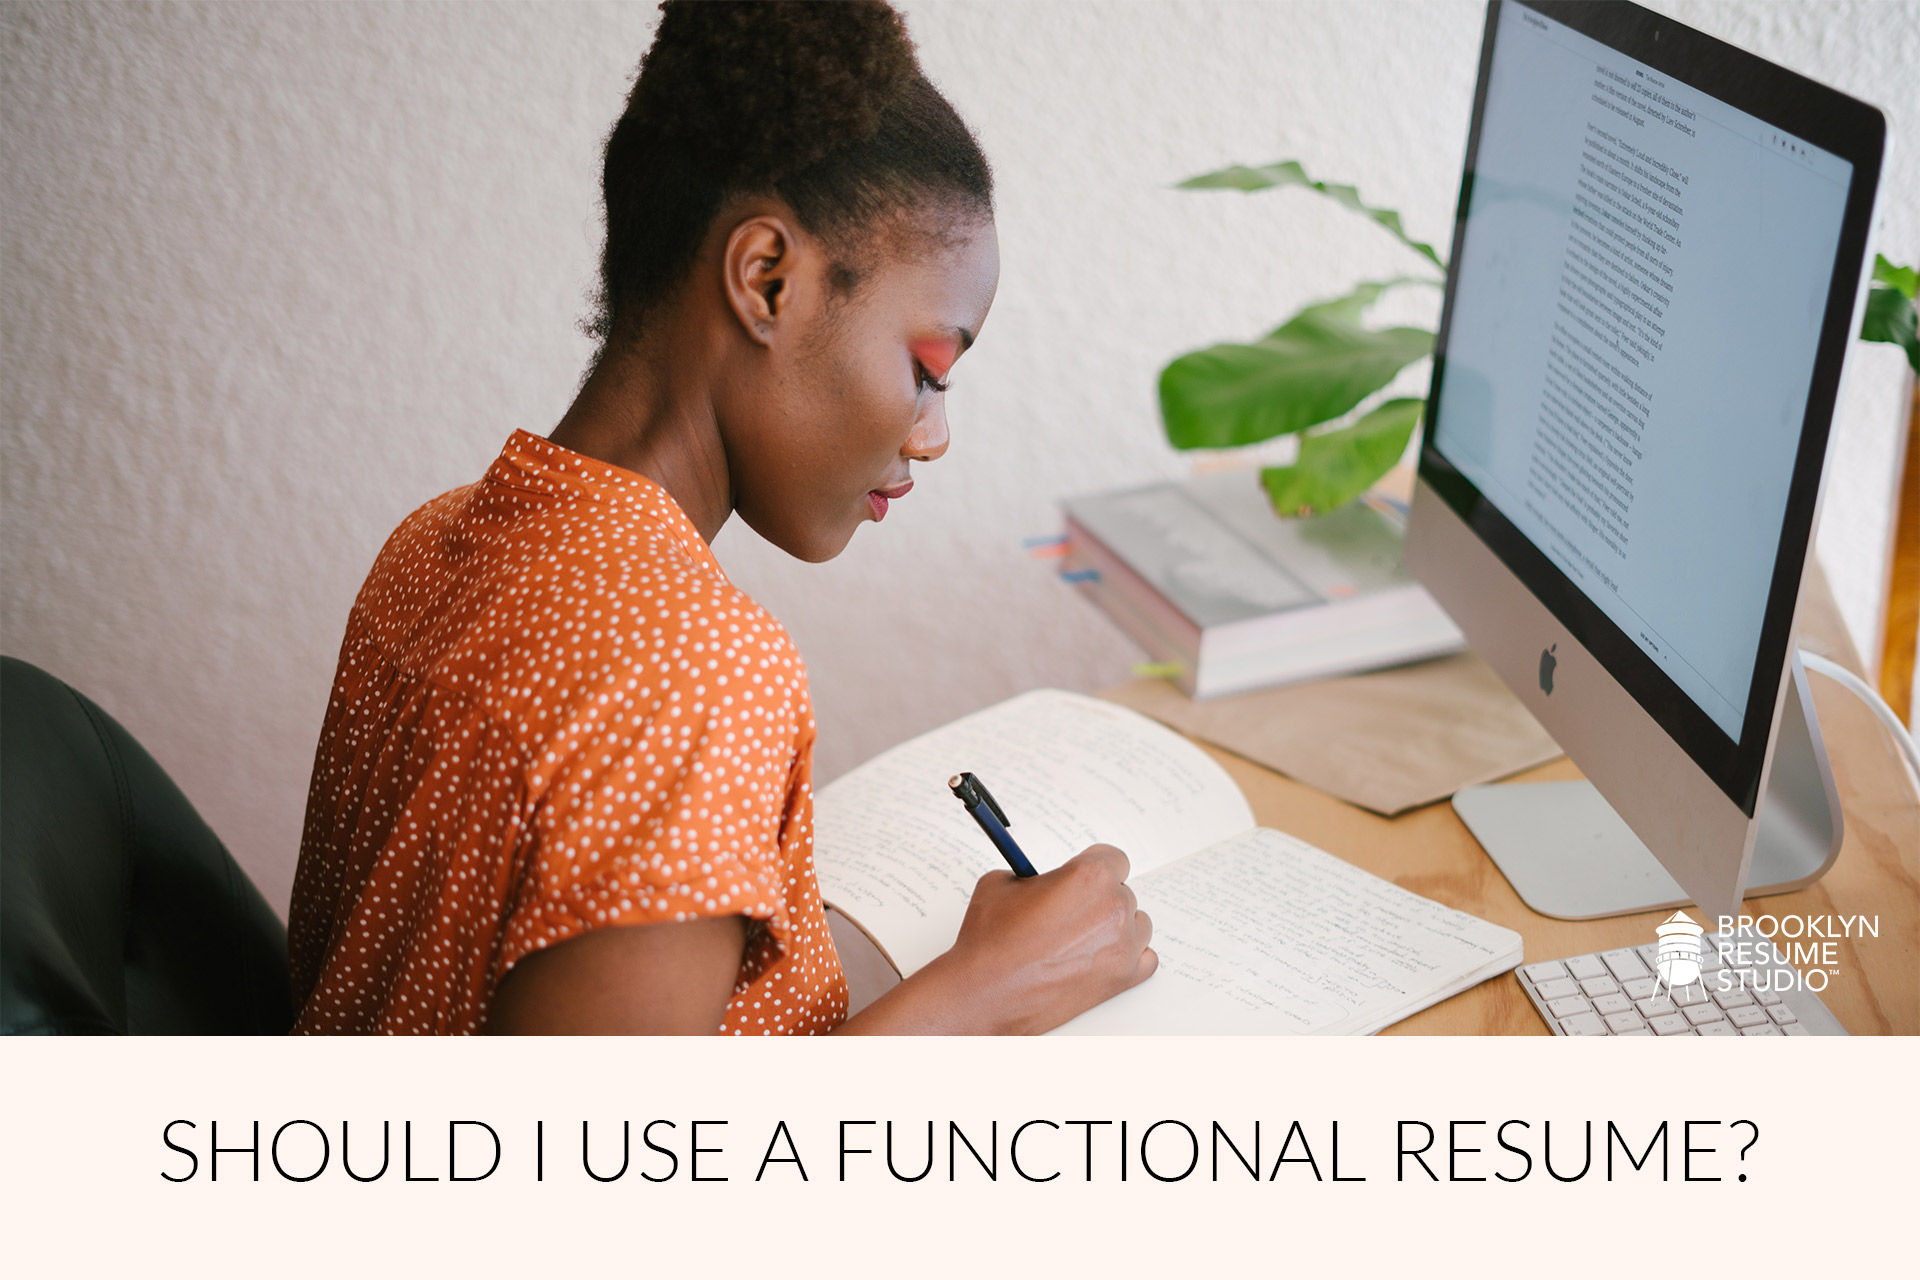 Functional Resumes - What are they and should I use one?